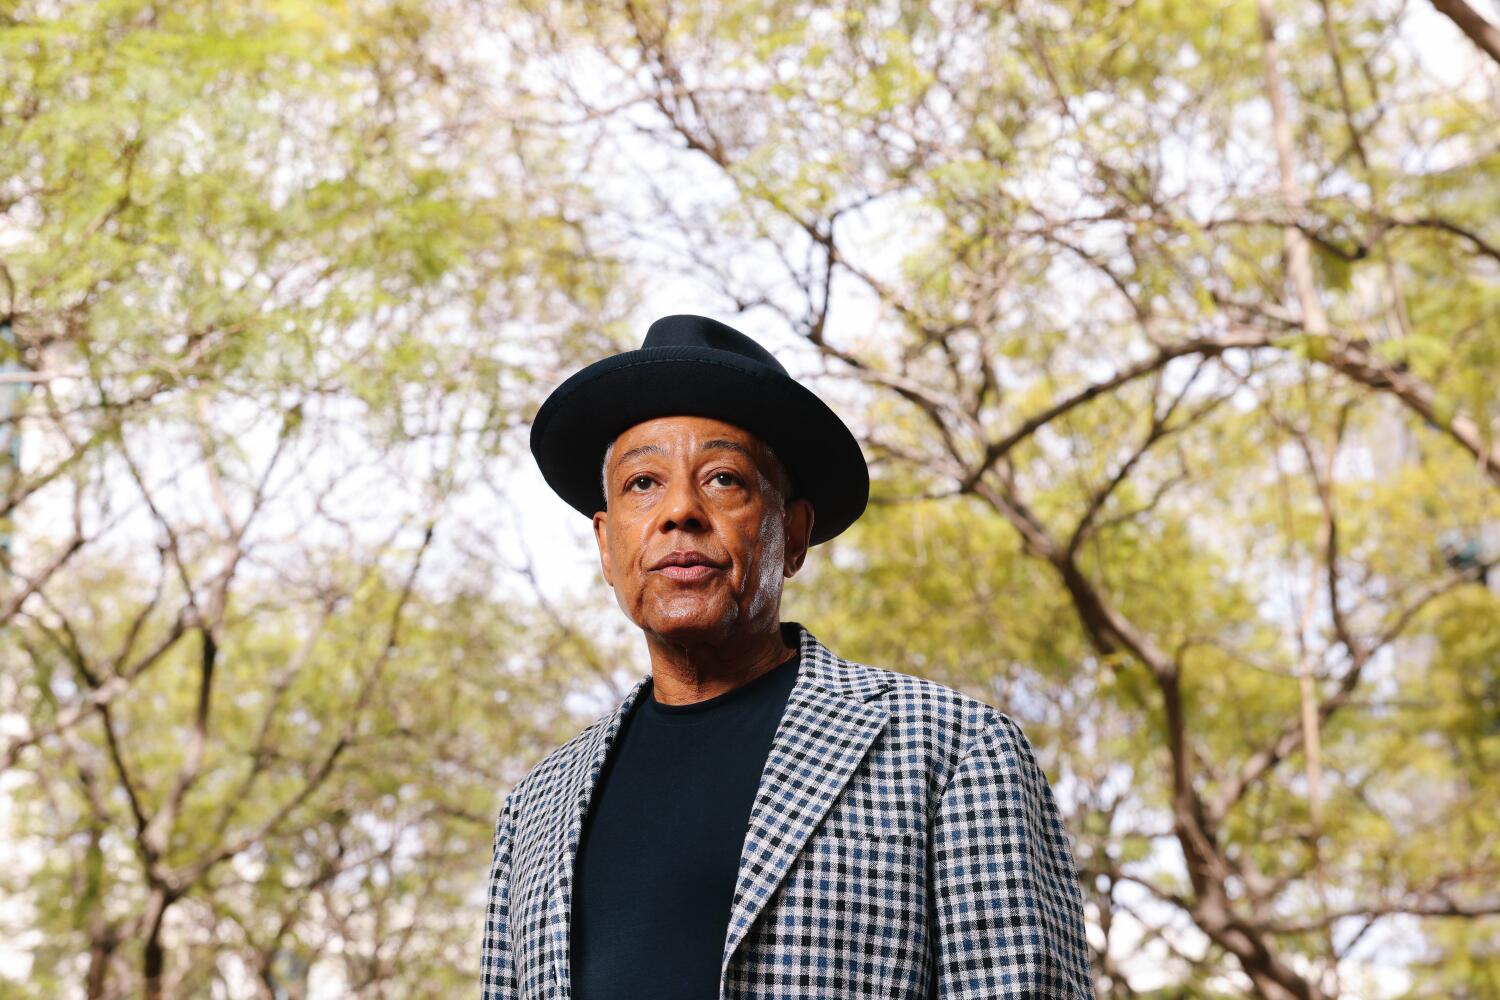 Giancarlo Esposito knows how to play the villain. In 'Parish,' he steps into the antihero role